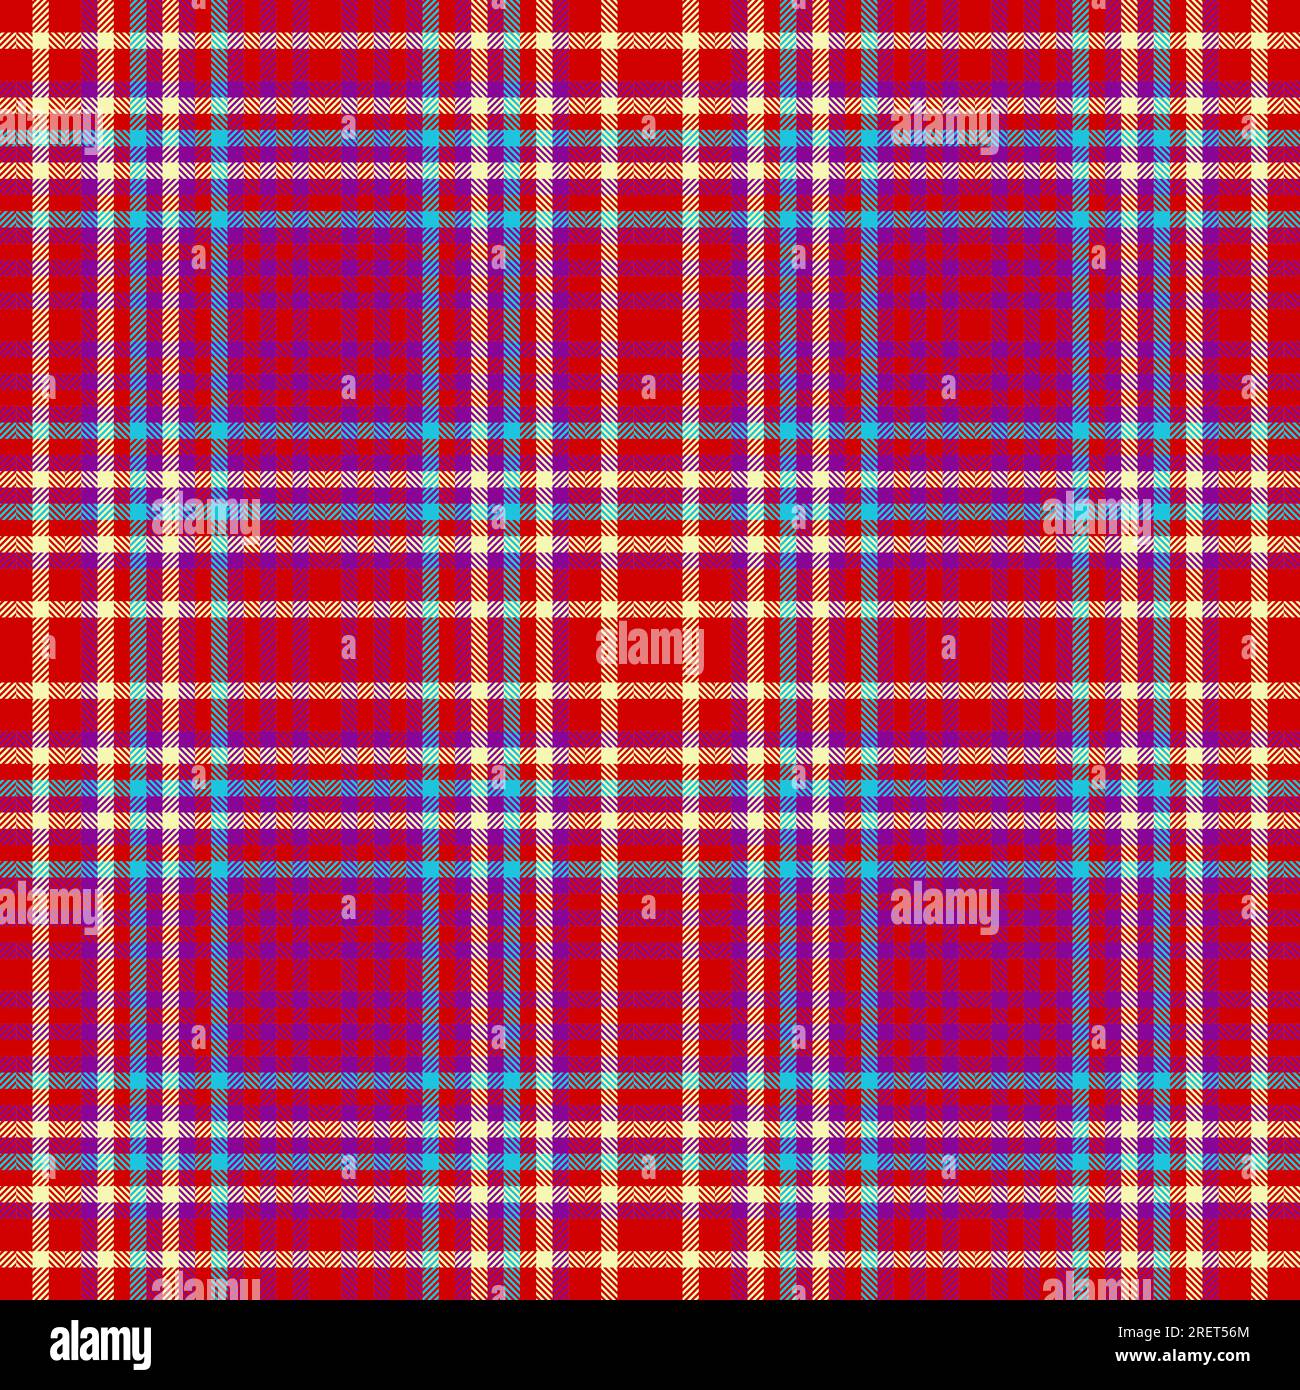 Seamless vector pattern of check background tartan with a textile fabric plaid texture in red and mauveine colors. Stock Vector